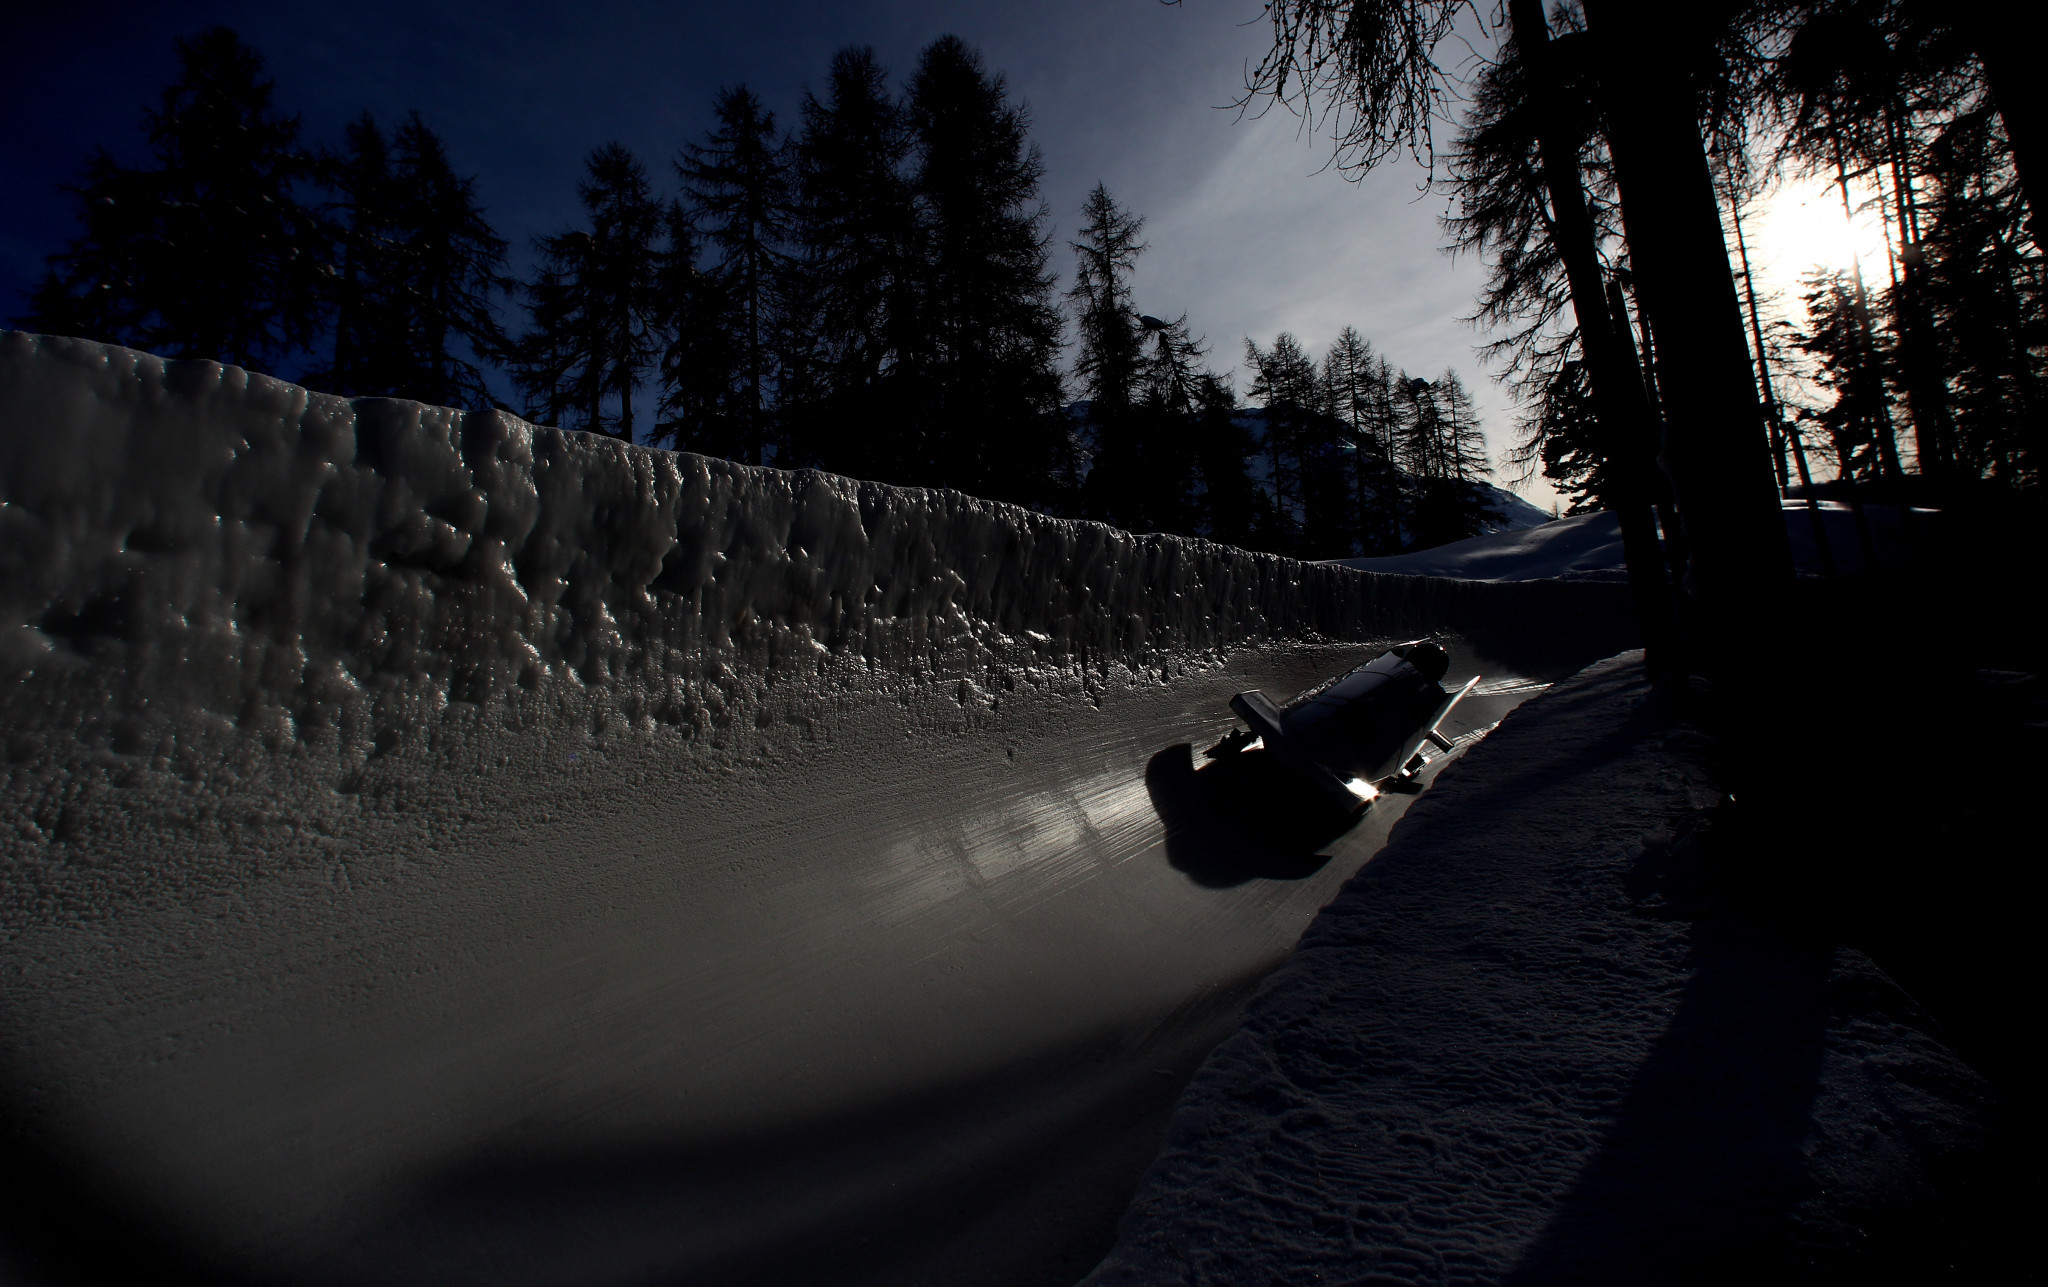 St Moritz's iconic natural ice track will host the last event of the season ©Getty Images